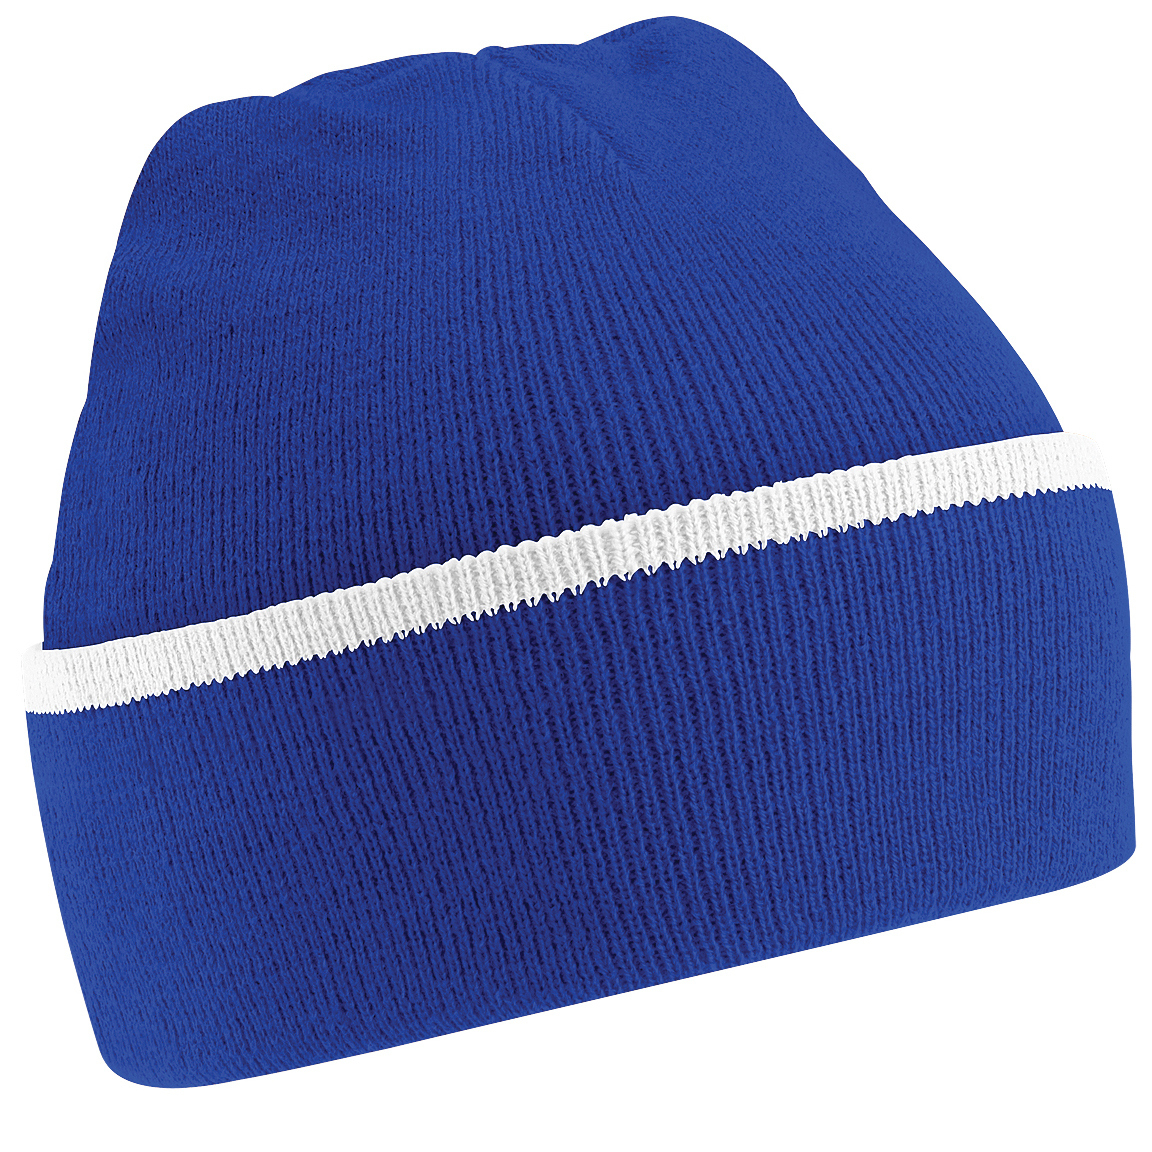 Beechfield  Knitted Winter Beanie Hat - image 2 of 6